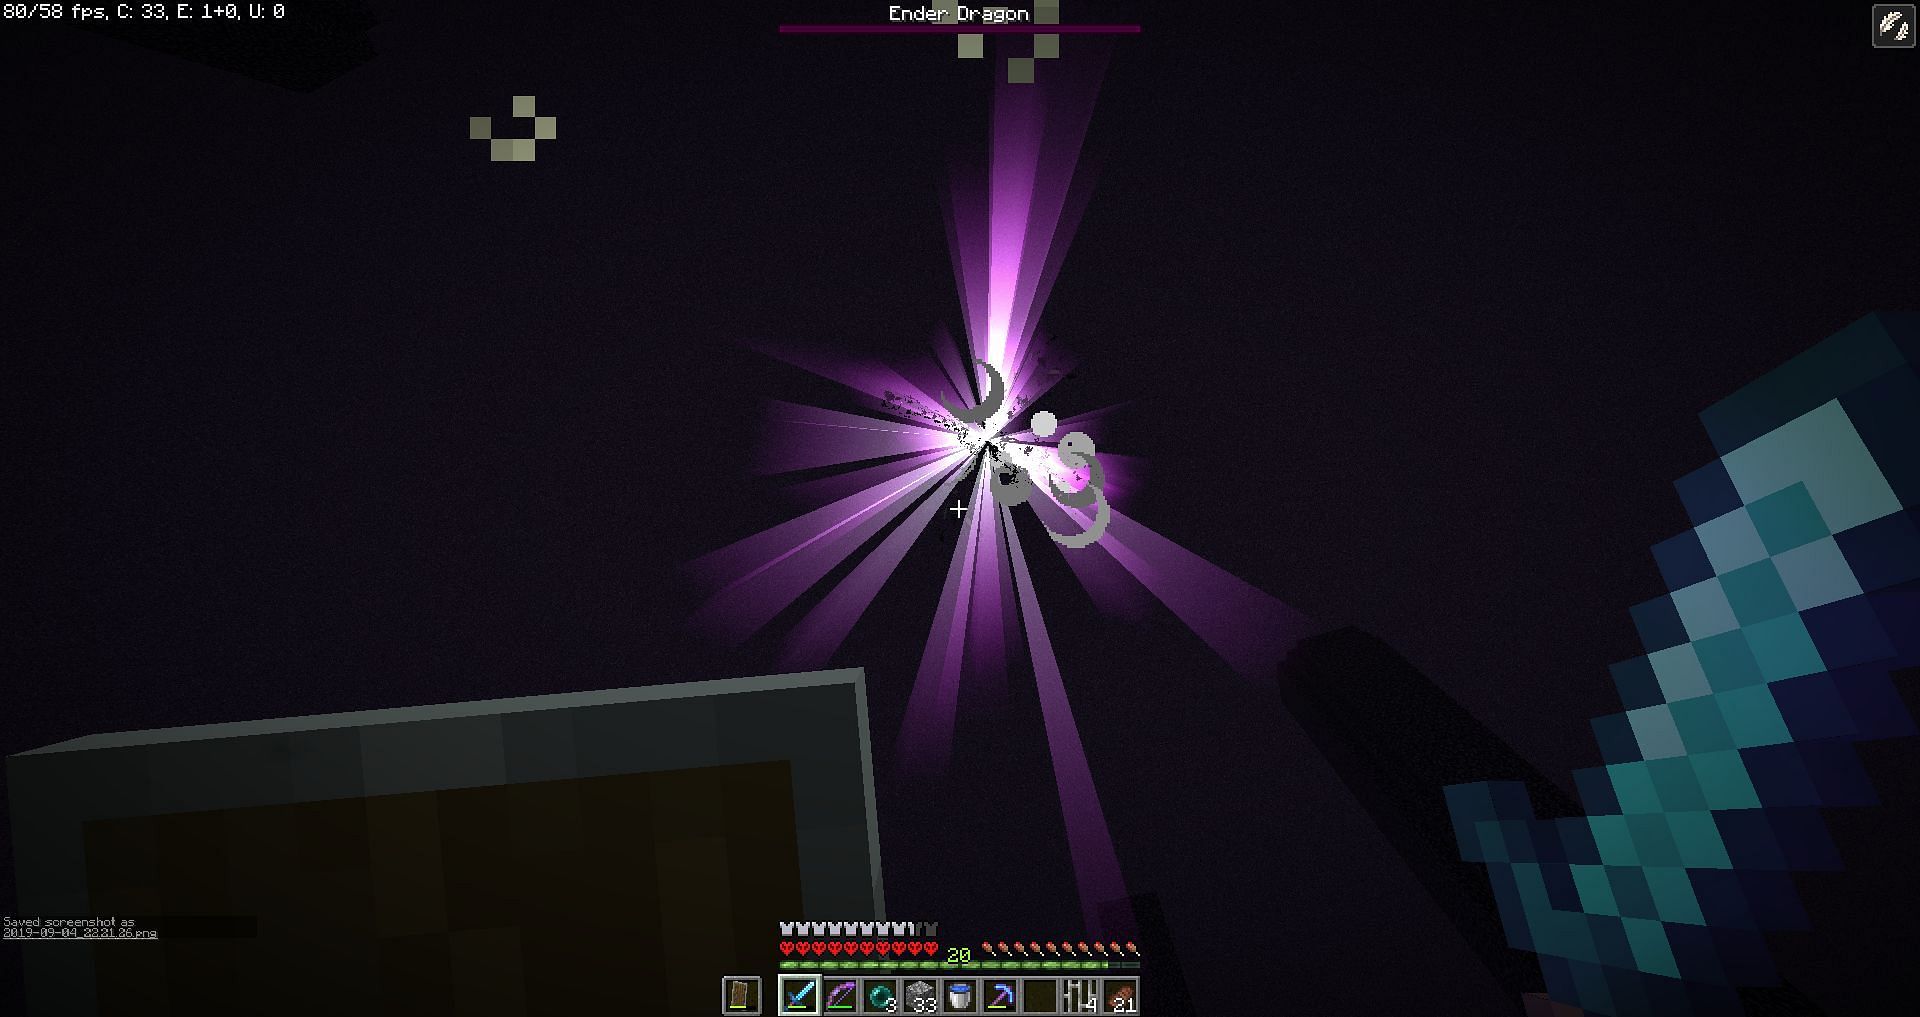 Defeating the Ender dragon (Image via Minecraft)